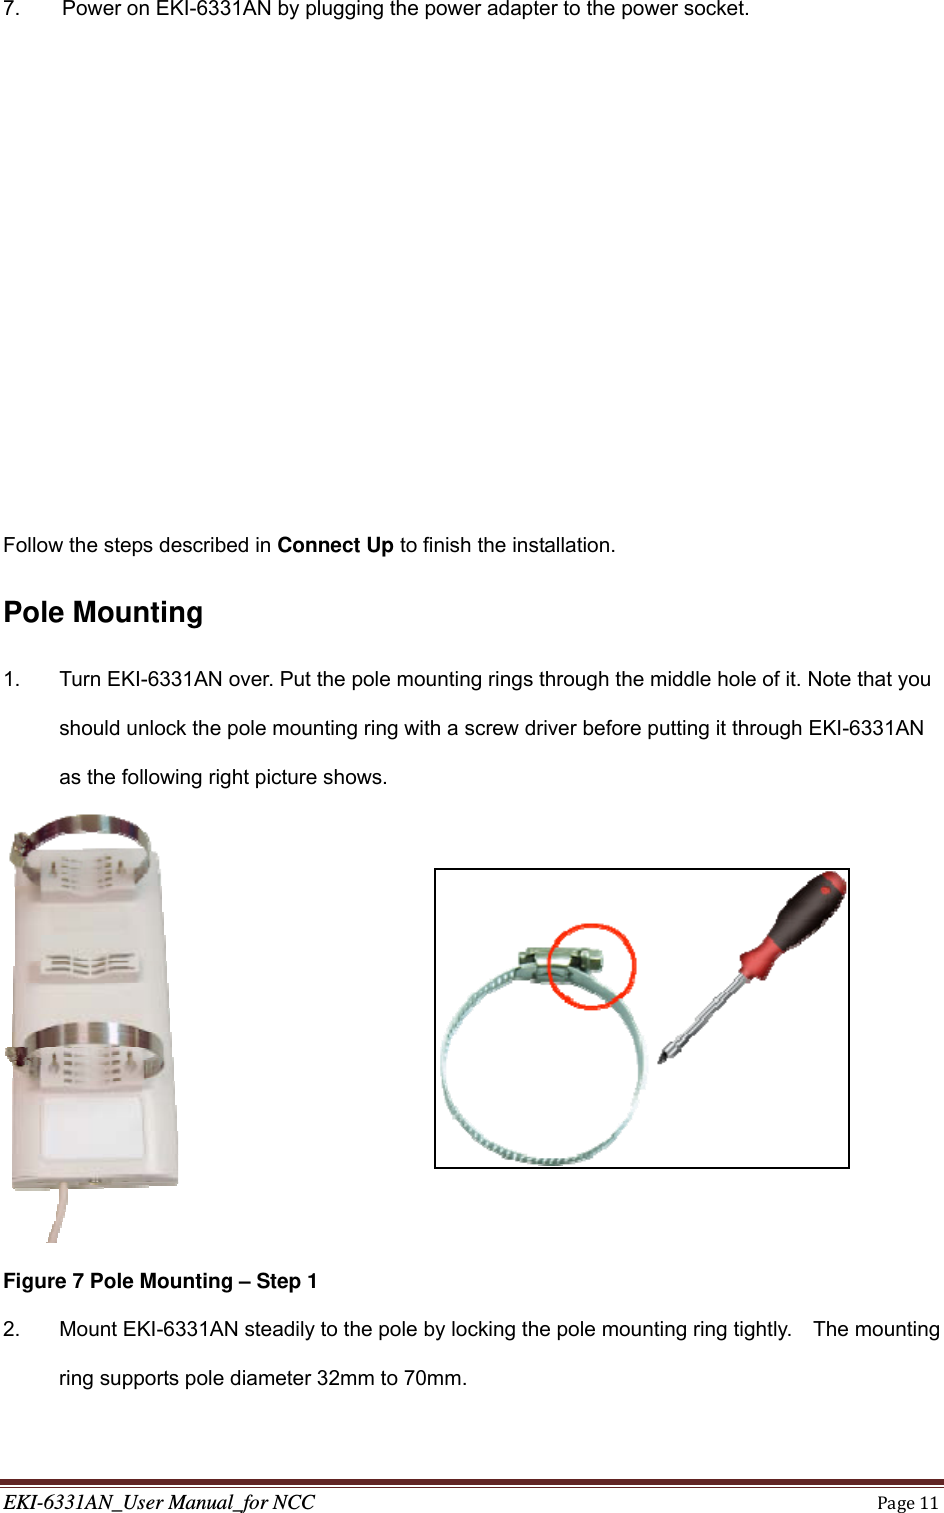 EKI-6331AN_User Manual_for NCCPage117.  Power on EKI-6331AN by plugging the power adapter to the power socket.           Follow the steps described in Connect Up to finish the installation. Pole Mounting 1.  Turn EKI-6331AN over. Put the pole mounting rings through the middle hole of it. Note that you should unlock the pole mounting ring with a screw driver before putting it through EKI-6331AN as the following right picture shows.   Figure 7 Pole Mounting – Step 1 2.  Mount EKI-6331AN steadily to the pole by locking the pole mounting ring tightly.    The mounting ring supports pole diameter 32mm to 70mm. 